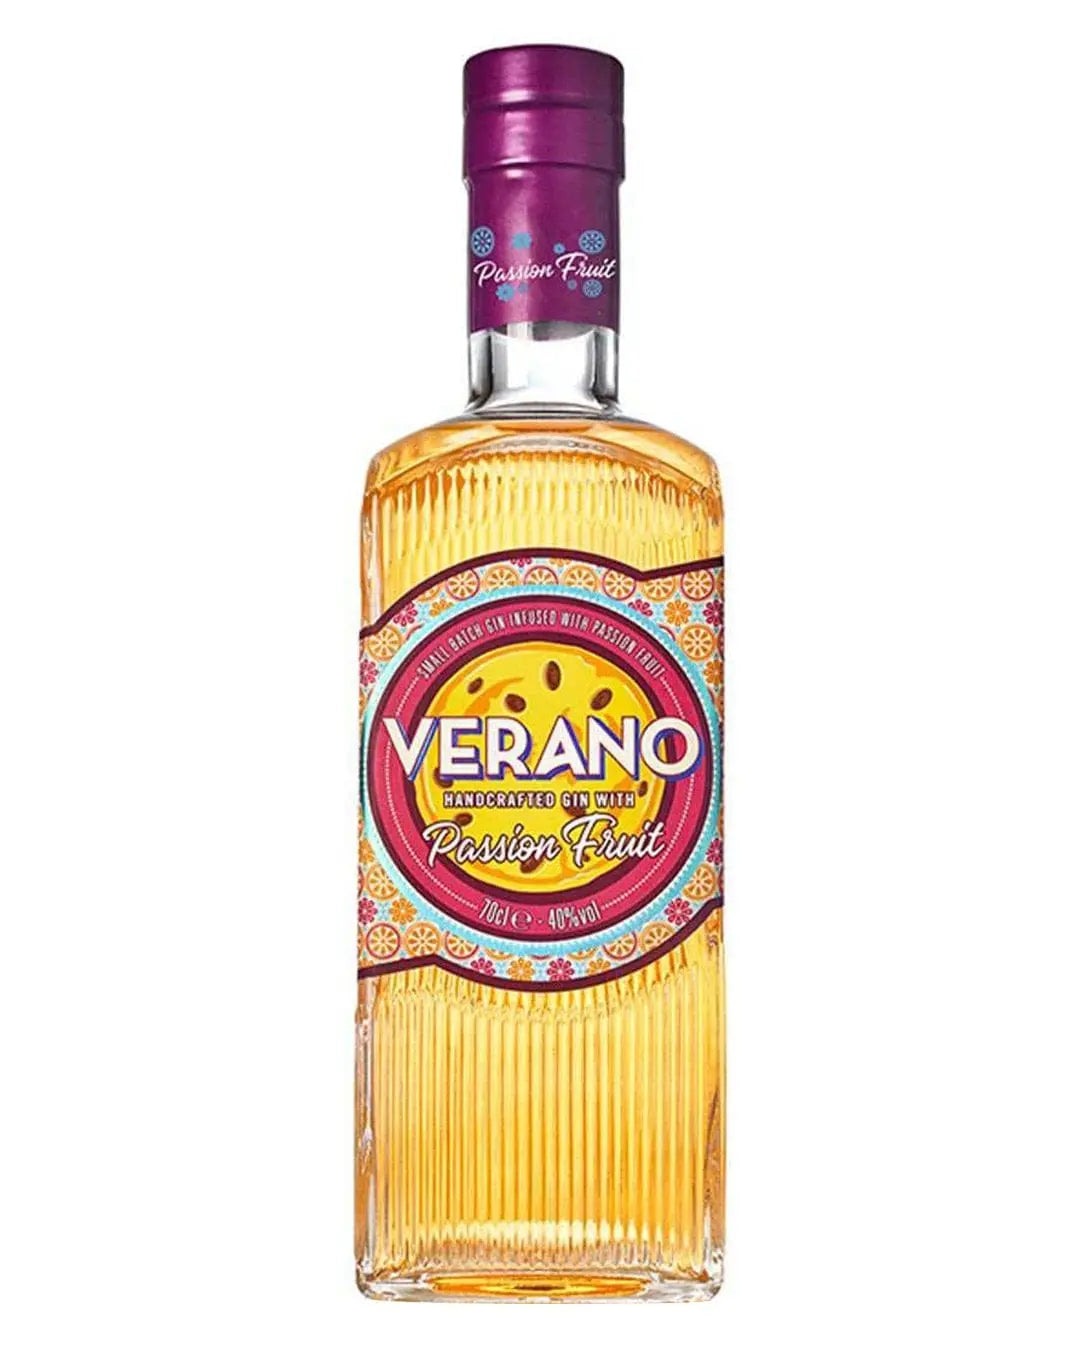 Verano Passion Fruit Gin, 70 cl Gin 5010327755120